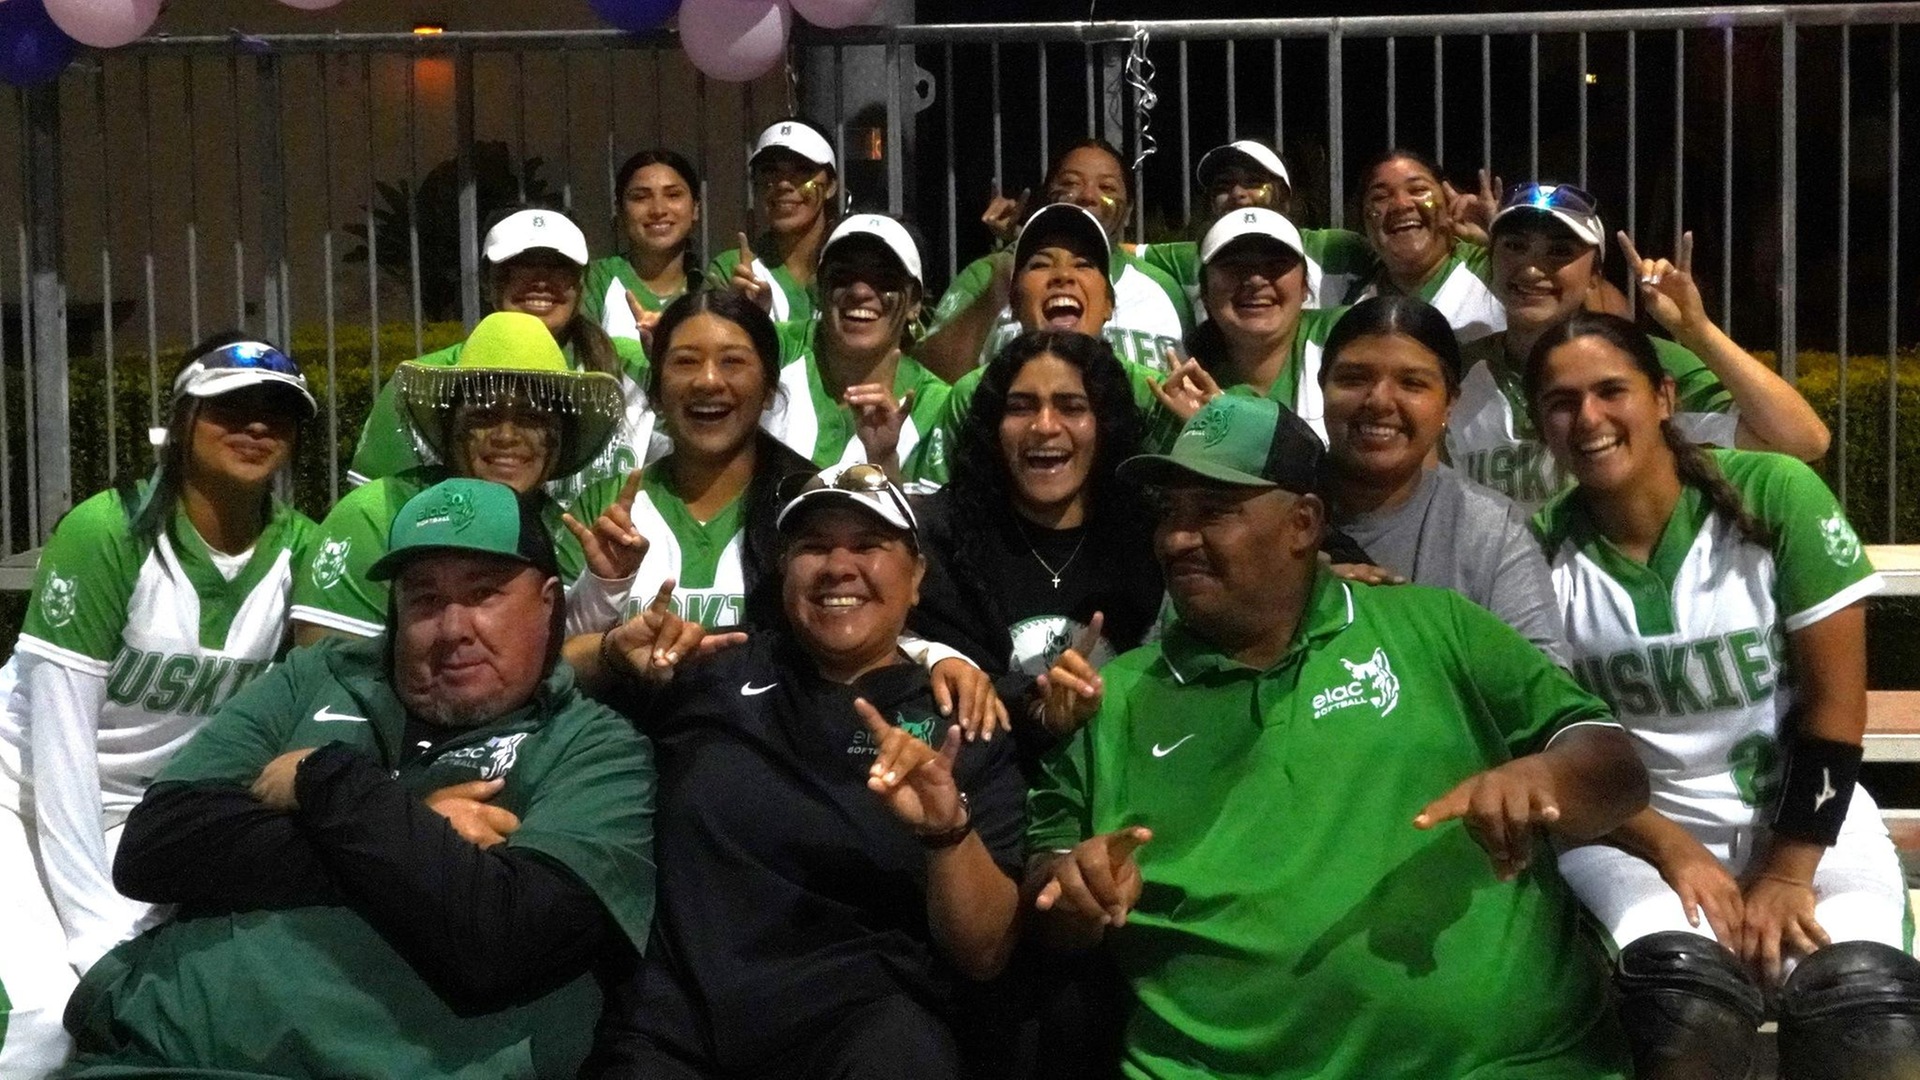 ELAC Softball Celebrates Women's History Month by Taming Rattlers